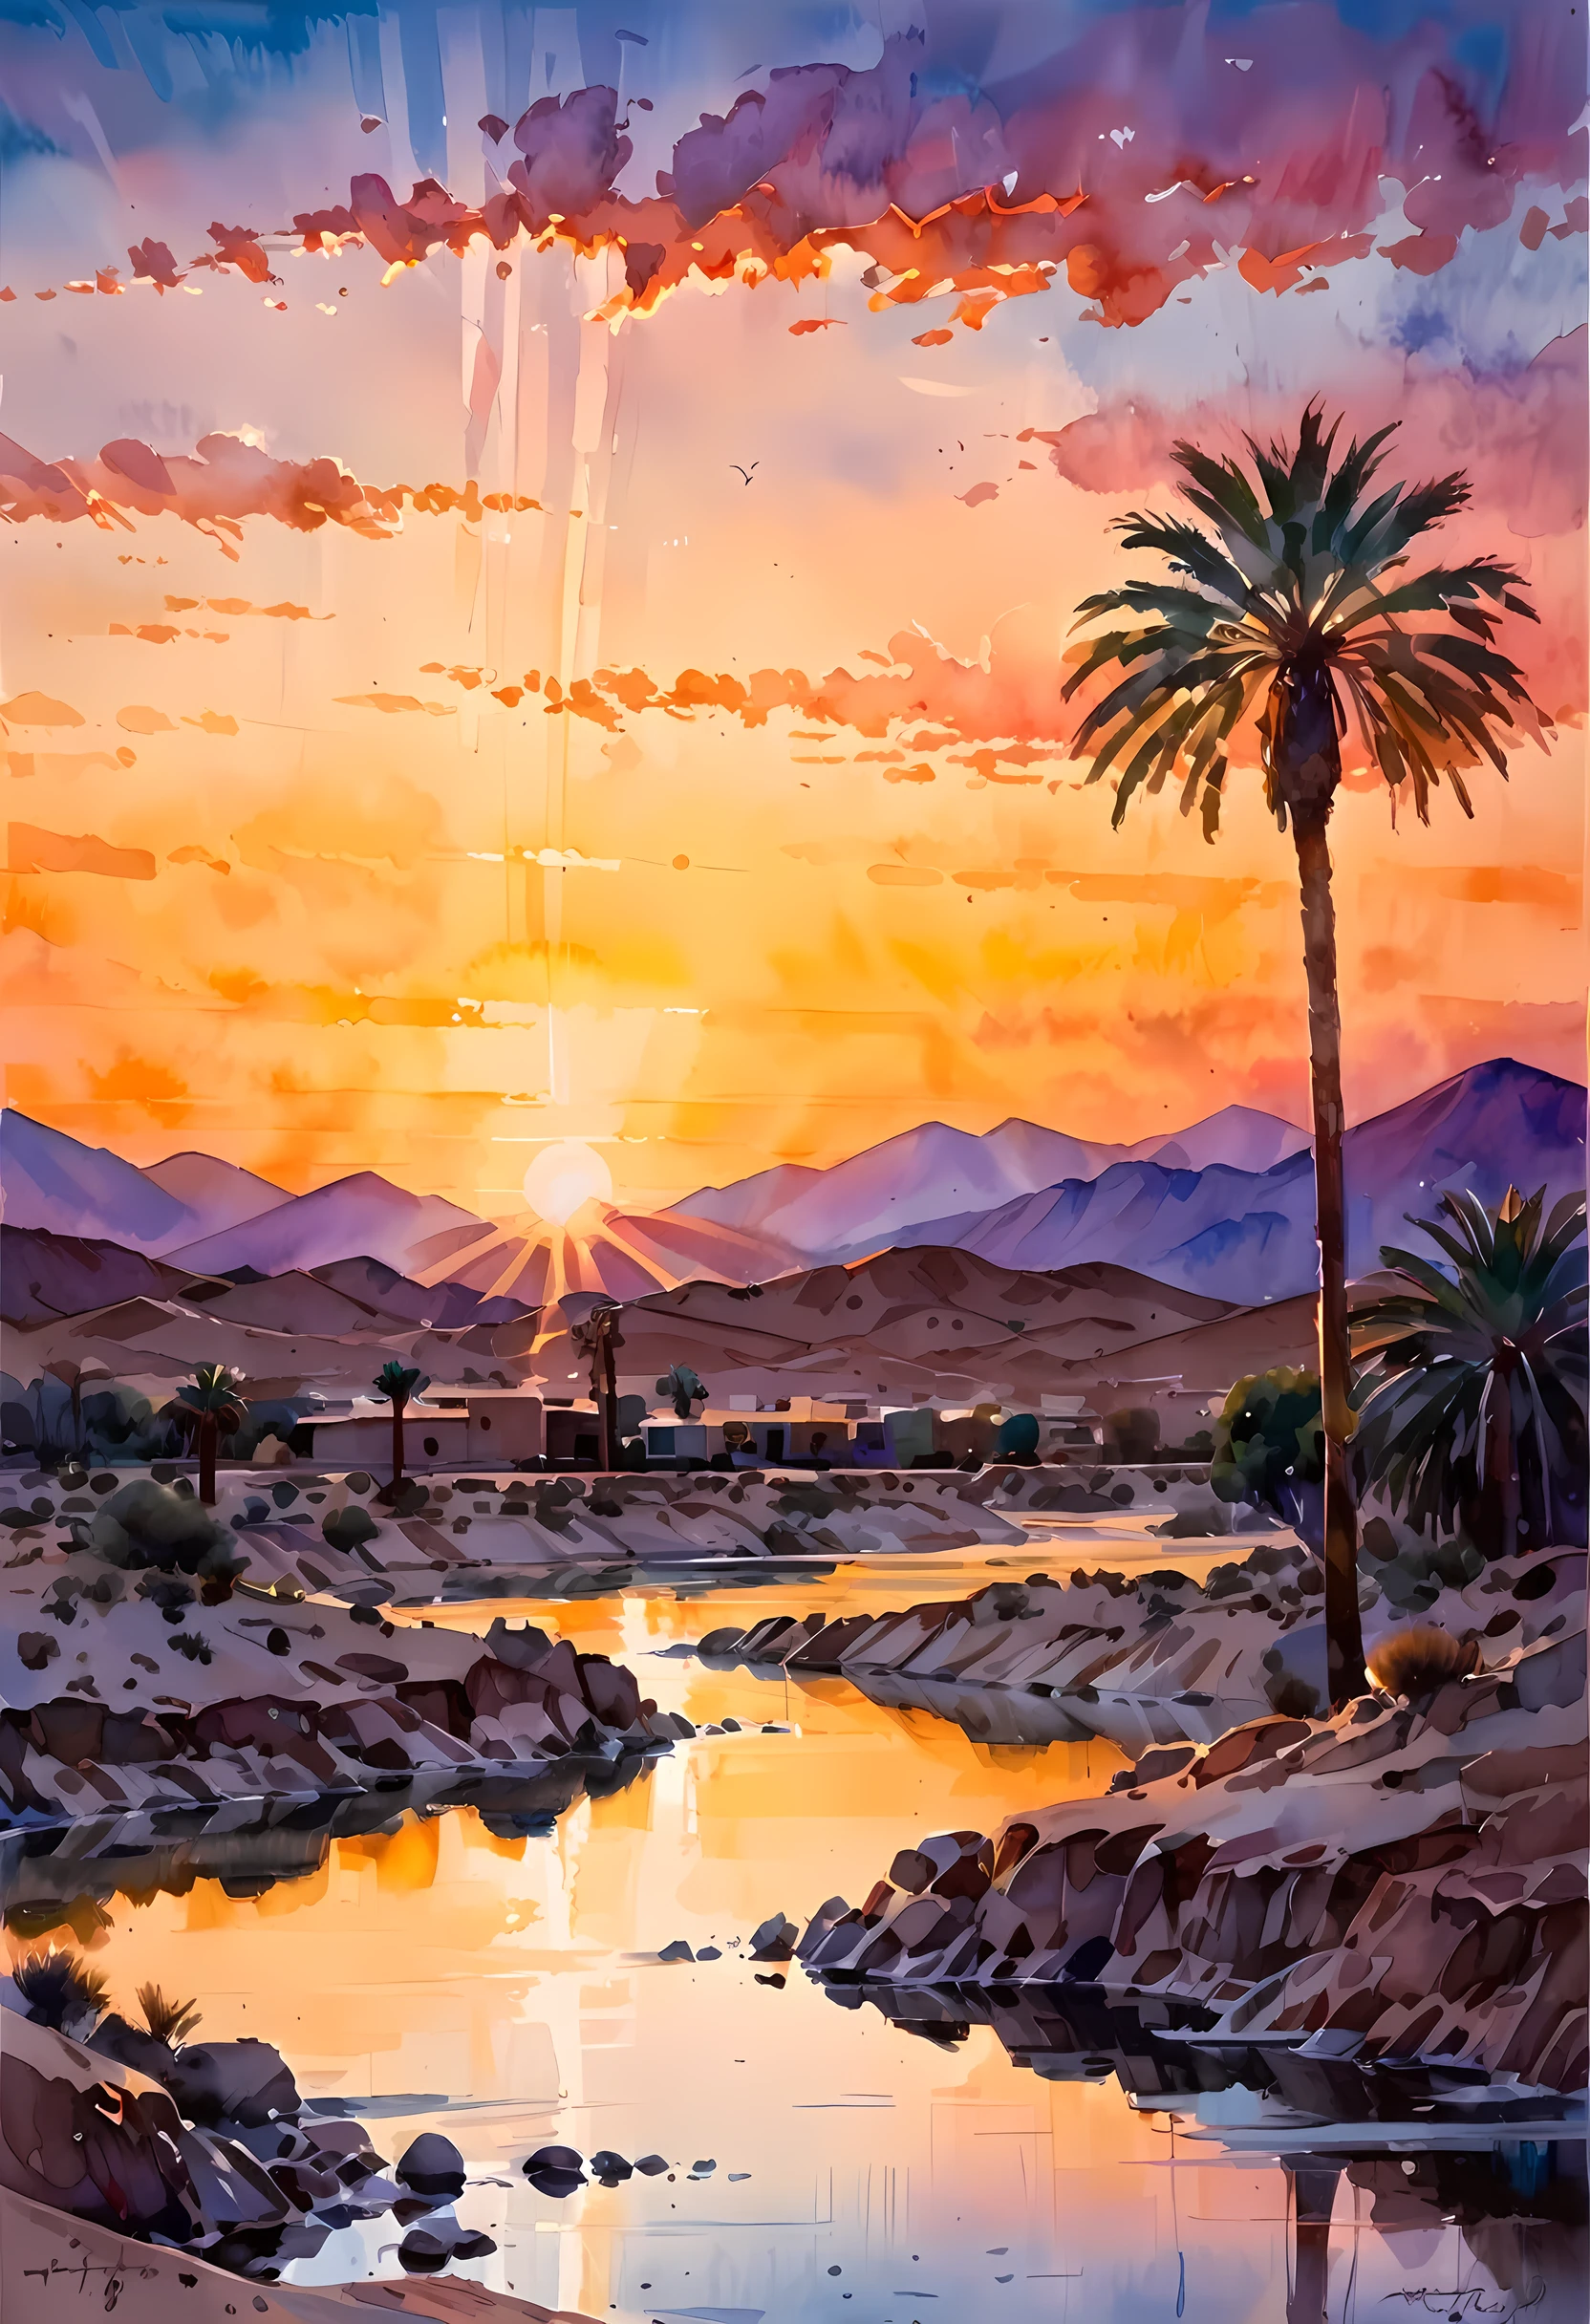 traditional watercolor painting (water color art: 1.5), an award wining, water color art, of an oasis (masterpiece, best detailed, best quality: 1.4) in the desert at sunset, there are some palm trees, and a small spring of water  (masterpiece, best detailed, best quality: 1.4), it is the time between night and day, there are some stars in the sky, and the sun is about to rise, the sky are in shades of, night, yellow and purple, first sun rays of dawn, rolling desert hills in the background, dynamic range, ultra wide shot, photorealism, depth of field, hyper realistic